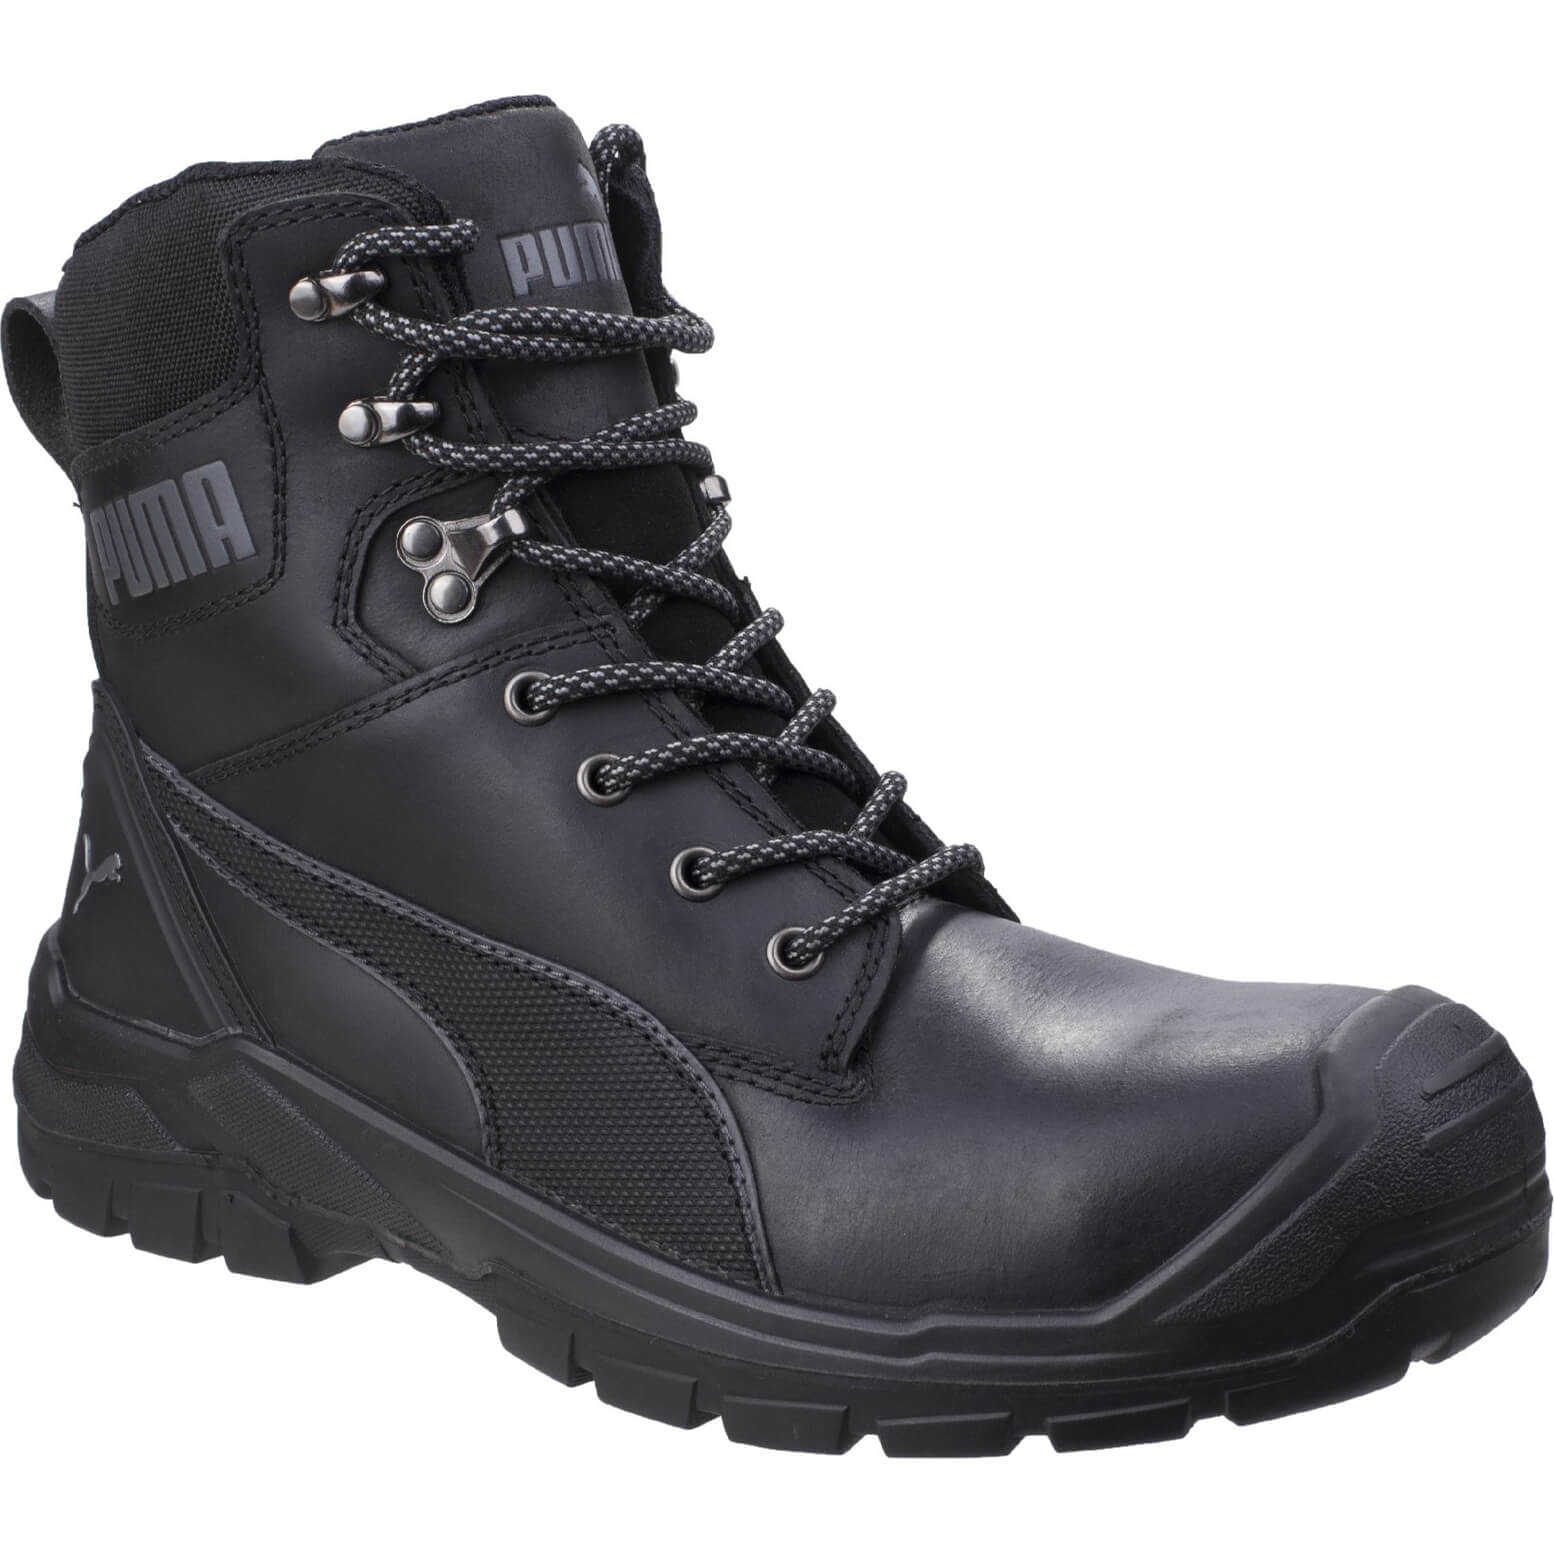 Image of Puma Mens Safety Conquest High Safety Boots Black Size 11